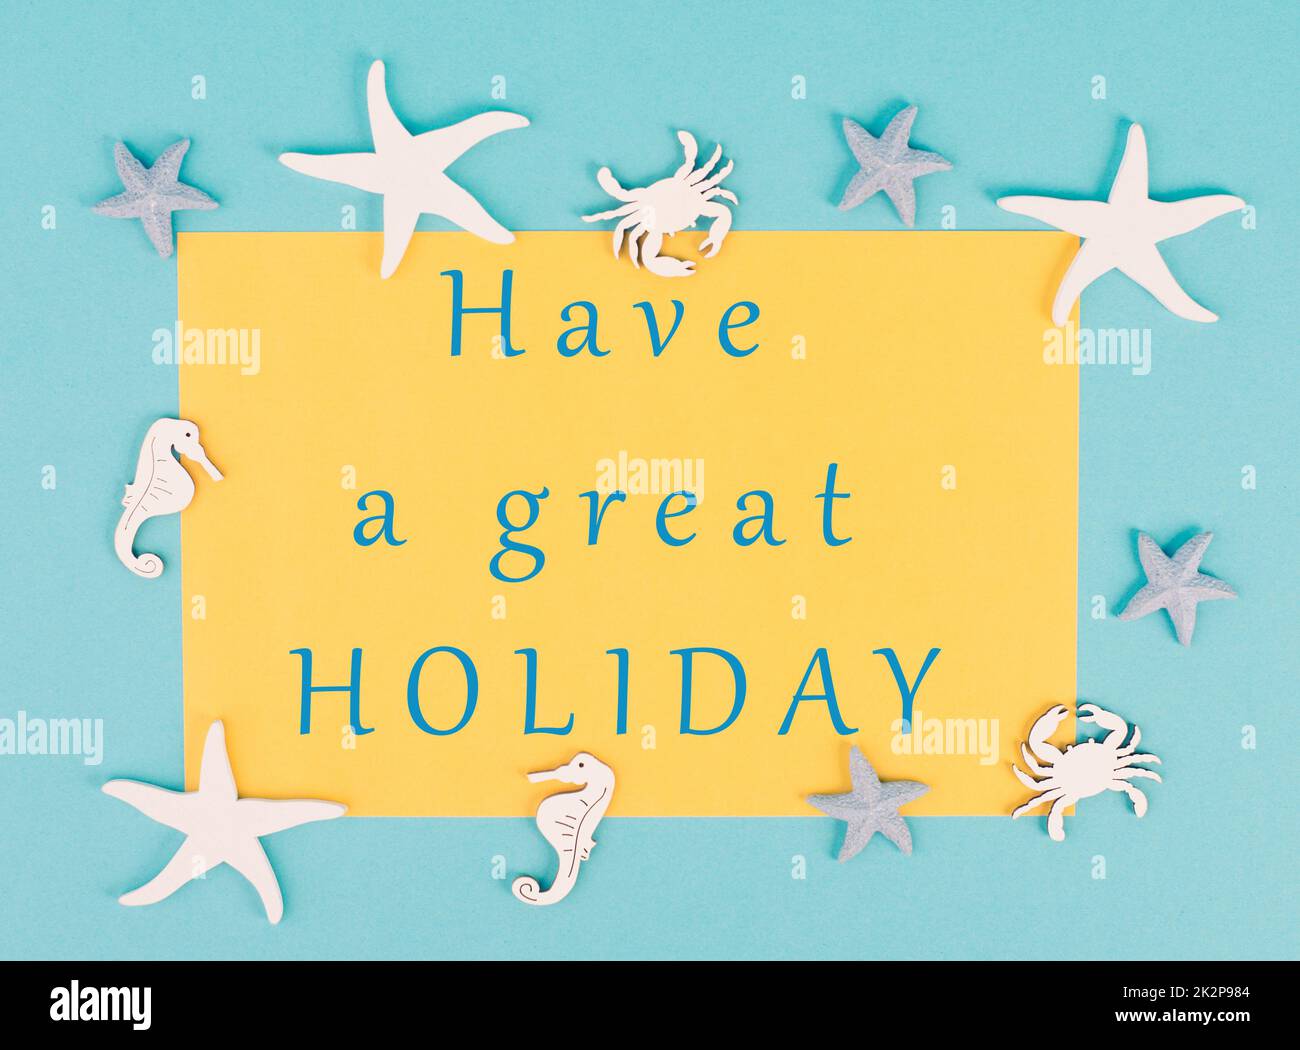 Have a great holiday is standing on the paper, sea stars, seahorses and crab bulding a frame, summer vacation, tourism travel destination Stock Photo